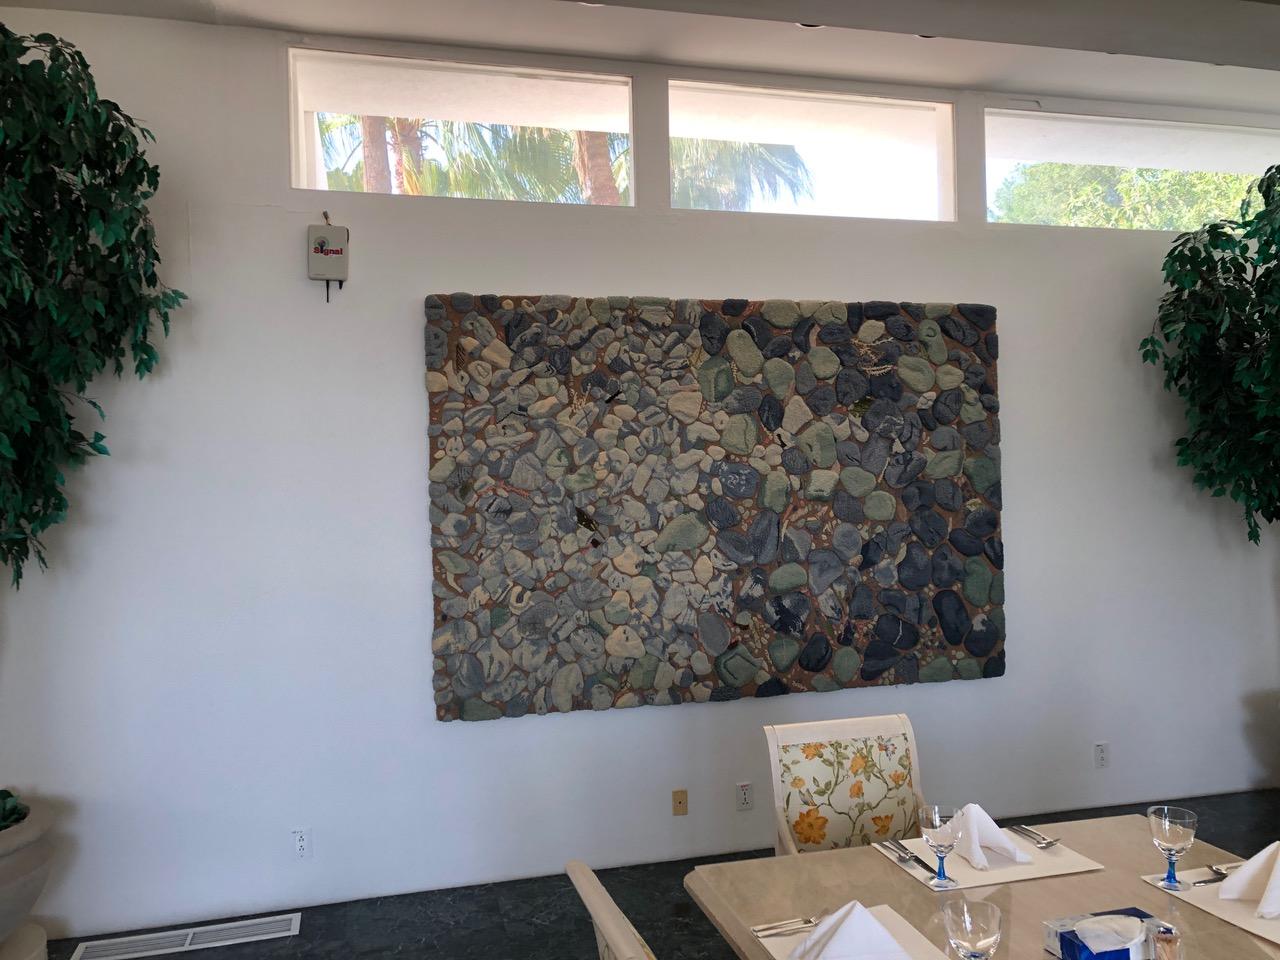 'Rocks at Ise' rug is from the 1990 debut collection by Groundplans. Handtufted and hand carved wool rug gives a 3-dimensional sculptural effect. Perfect as wall art or art for the floor. 

100% wool. 

Jody Harrow, founder of Groundplans has